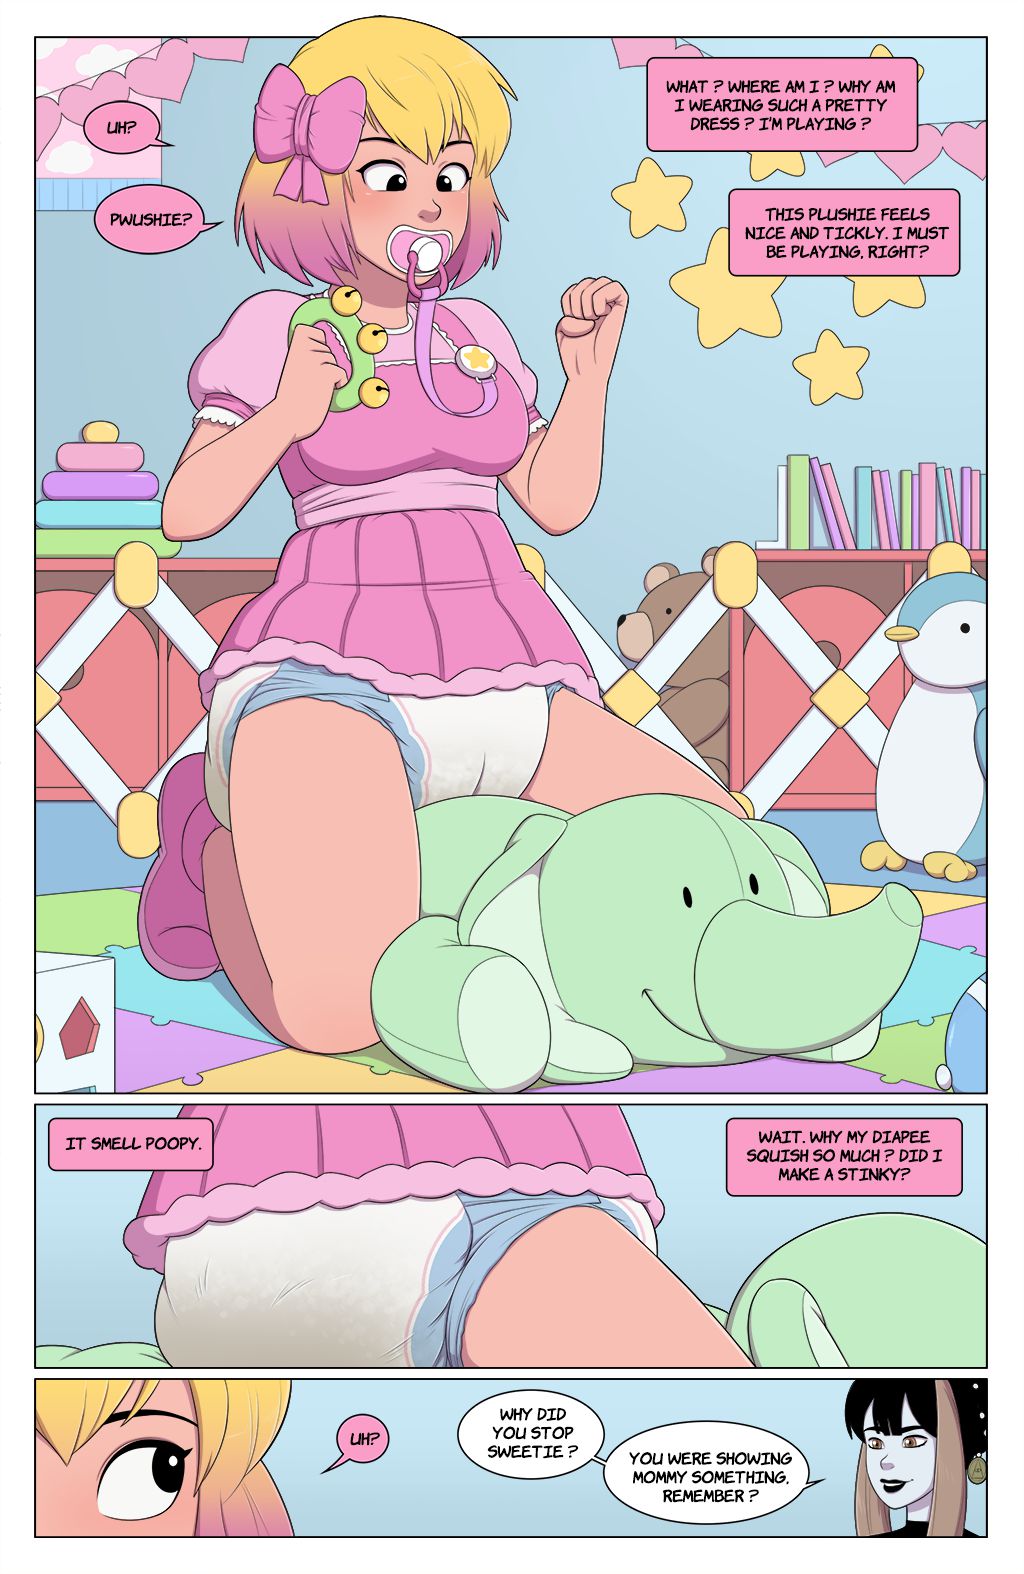 [PieceofSoap] Shits and Giggles (Gwenpool) [Ongoing] 15